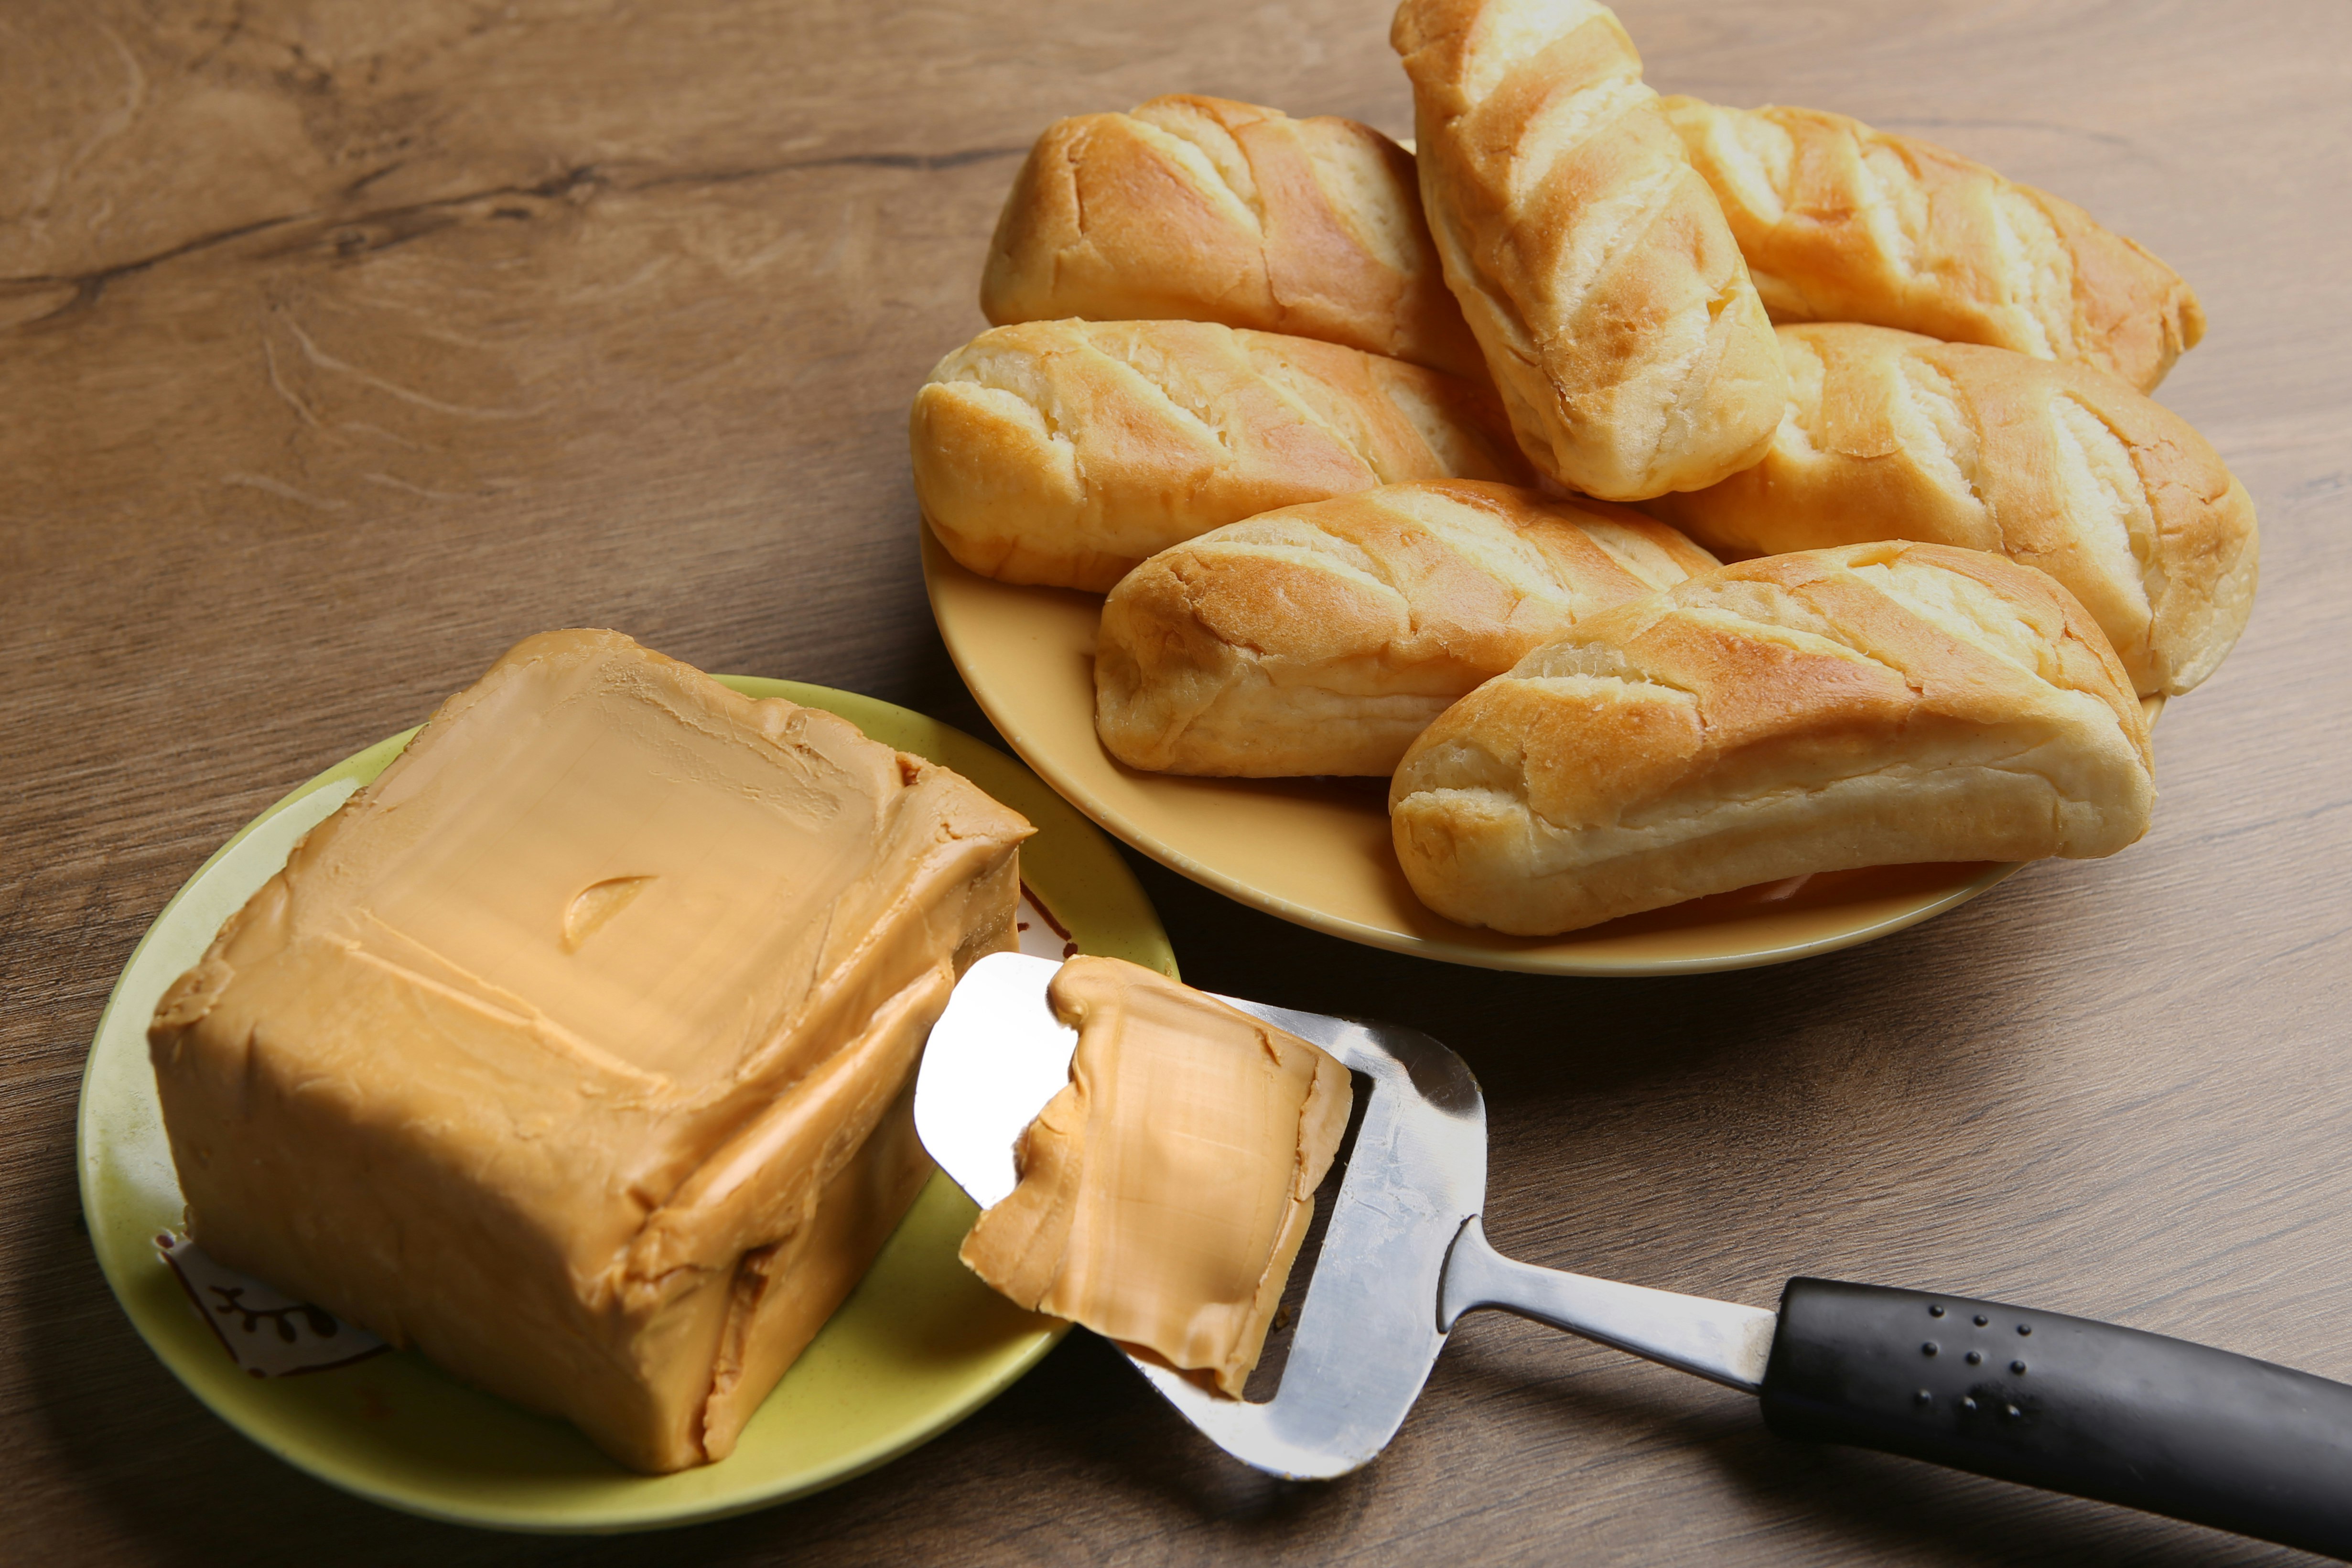 A large, light brown brick of brunost sits on a pistachio green plate with a cheese slicer resting against it with a thin strip of brunost freshly cut. In the background is a plate of hard Norewegian dinner rolls, all on a warm wood table.